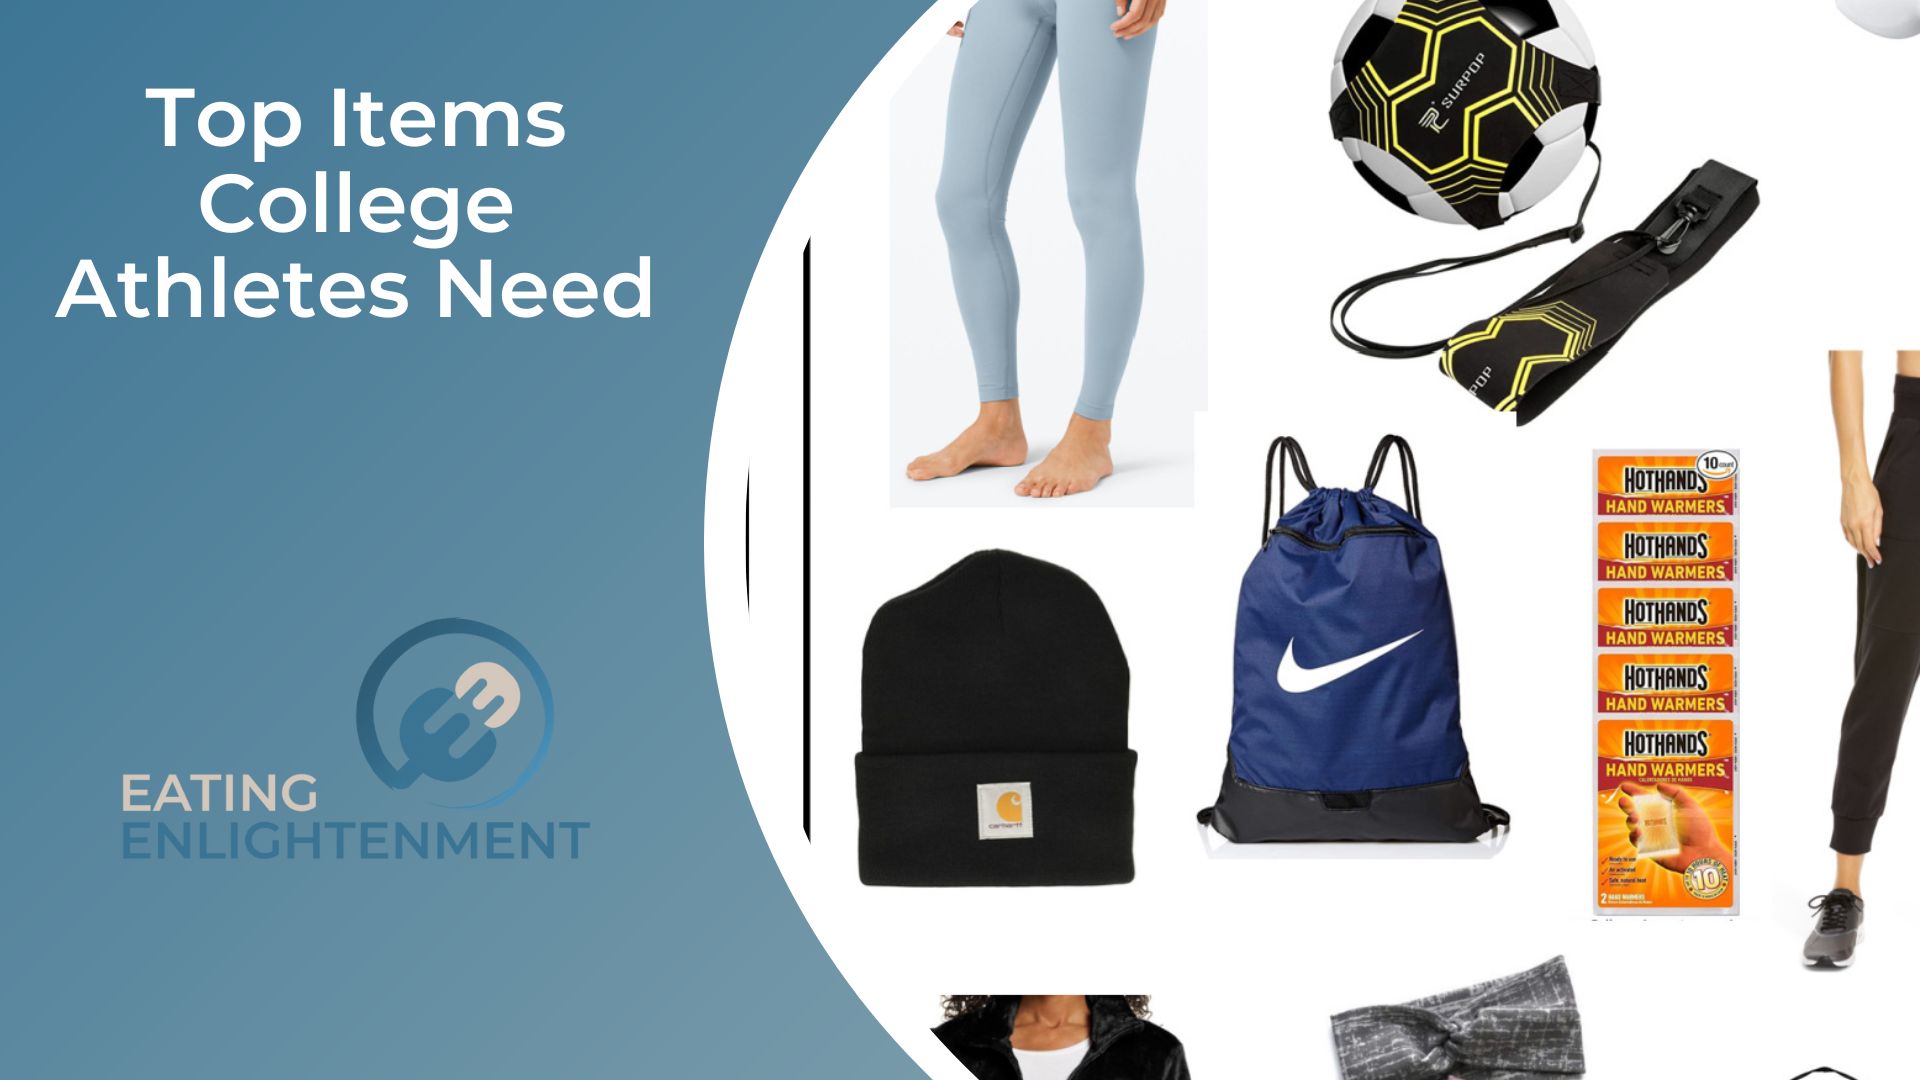 Top Items College Athletes Need